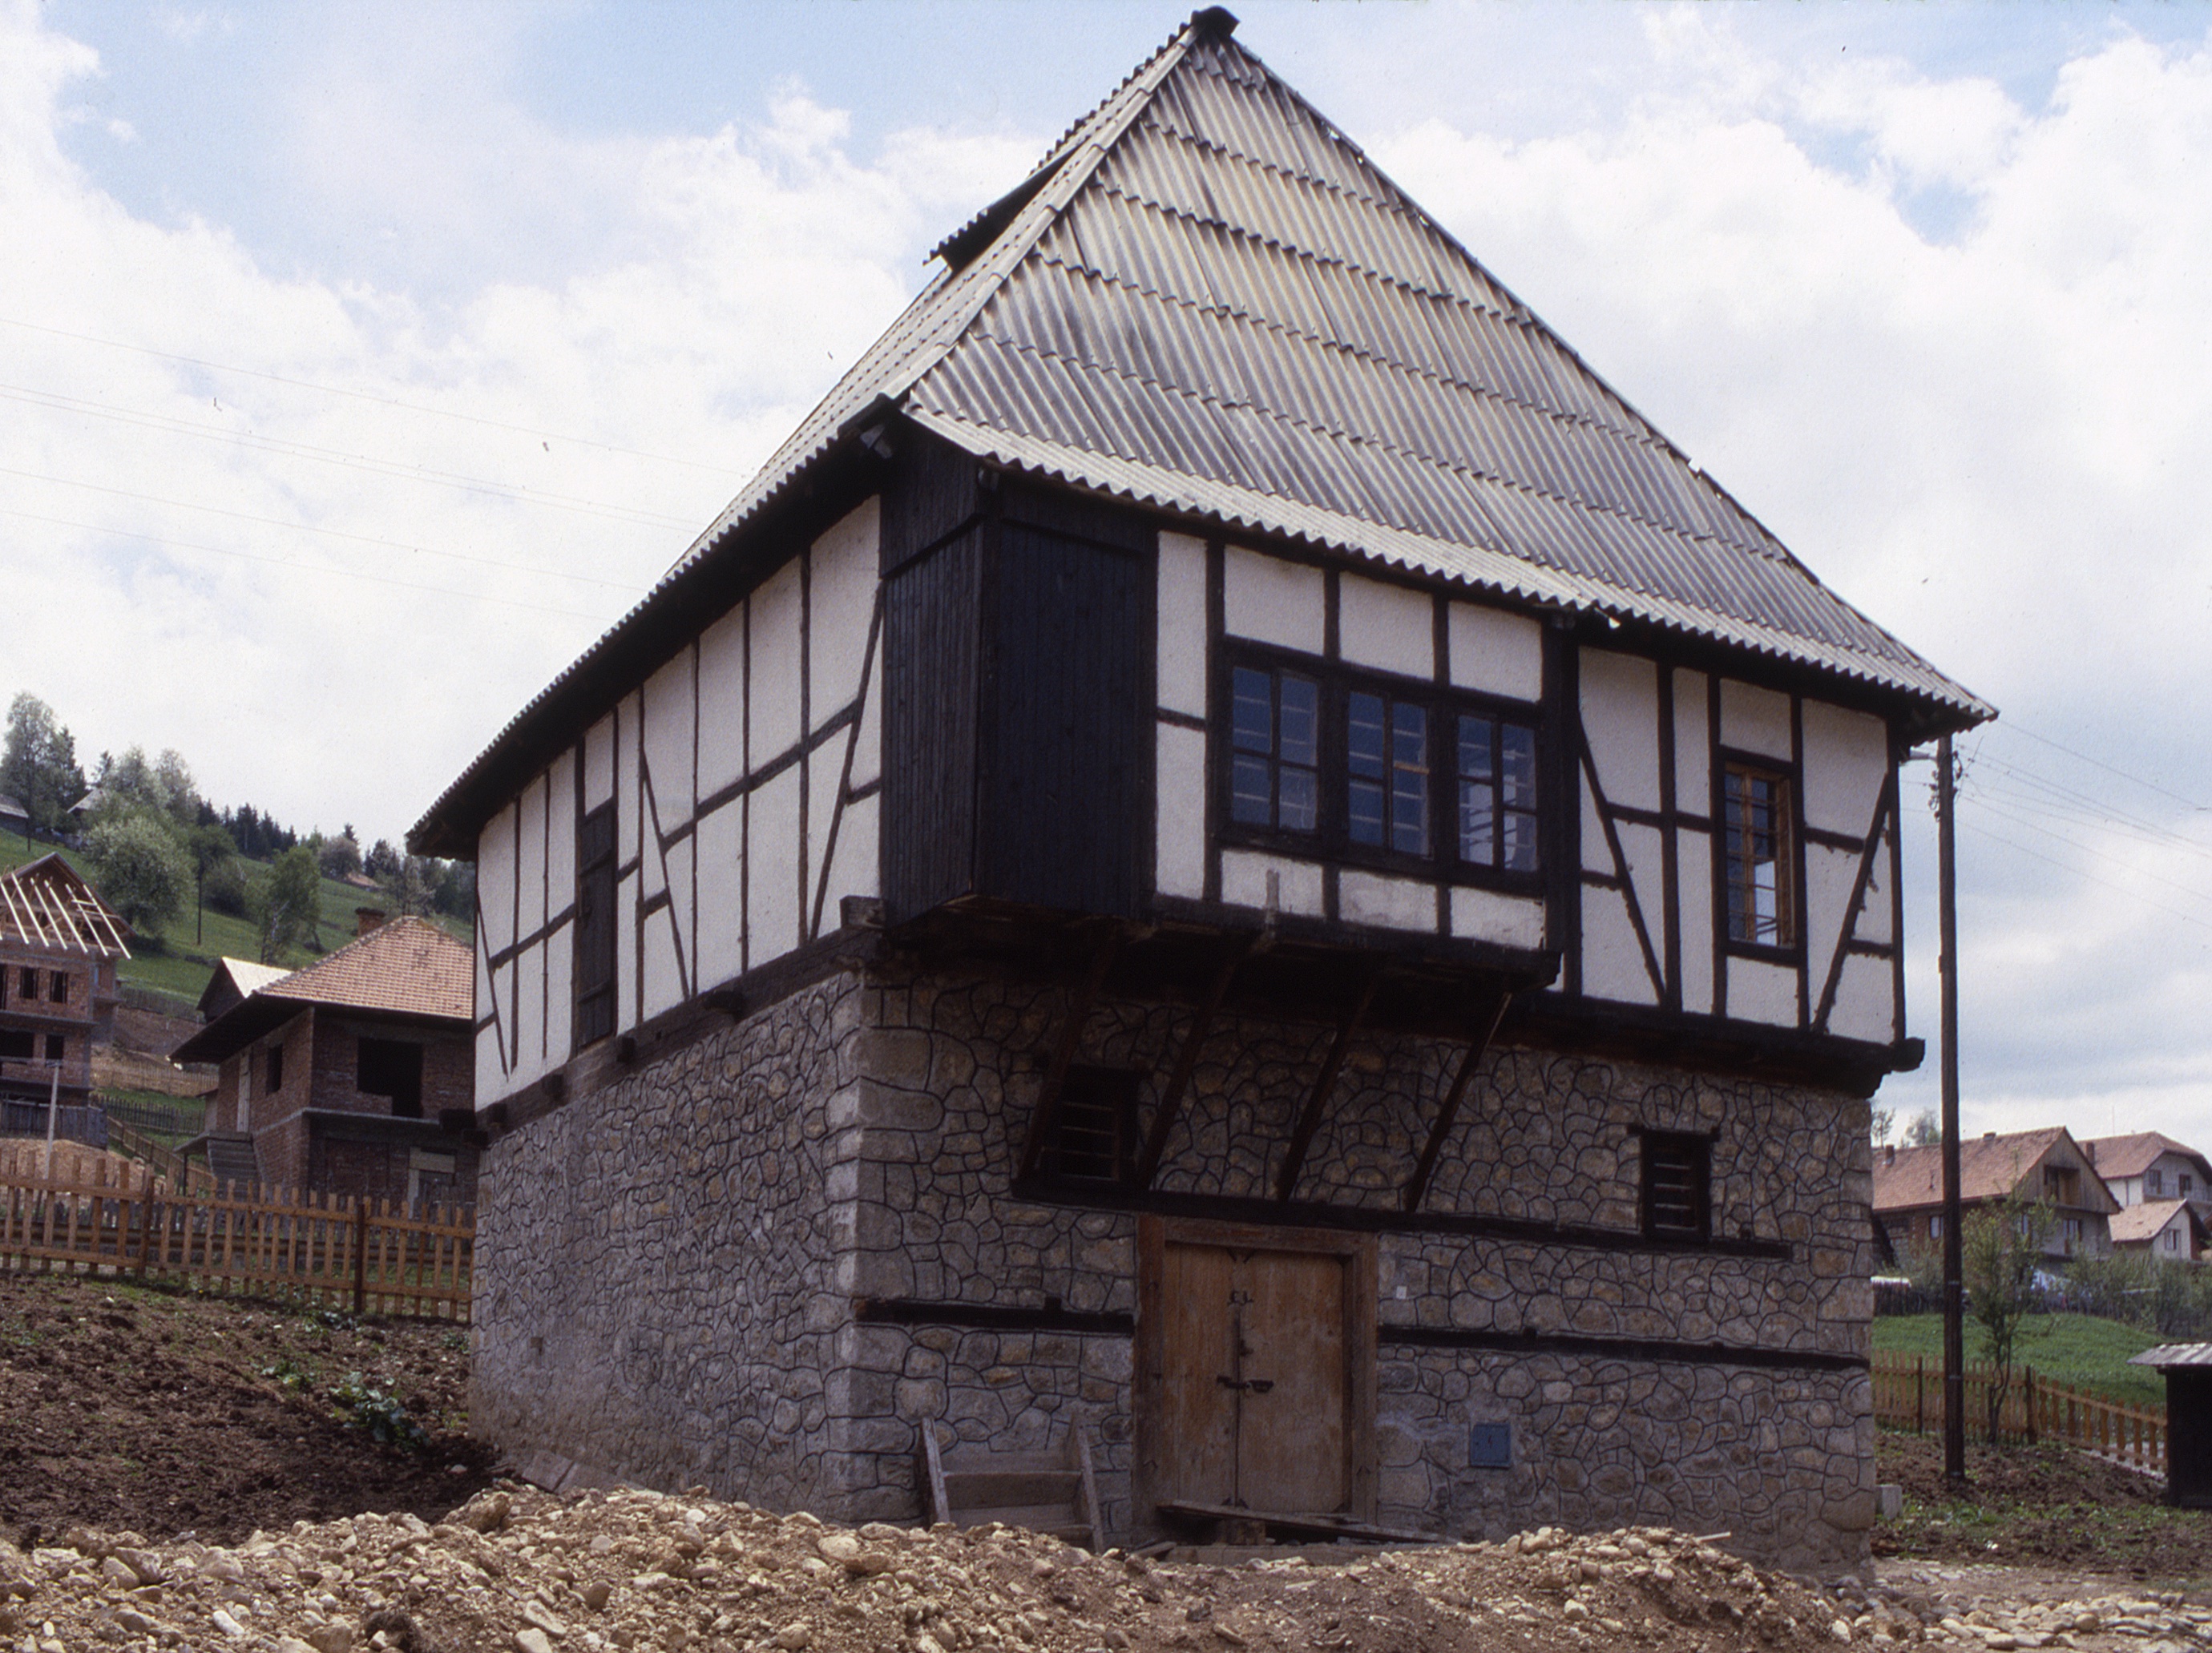 <p>This traditional kuća is undergoing renovations. The lower level walls are constructed of stone with integrated wooden reinforcing strips to stabilize the walls and provide lintels over doors and windows. The upper level floor, walls, and roof are timber framed. The walls were constructed using wattle and daub infill with a plaster coating. The roofing appears to be made of cementitious corrugated panels. The steep hipped roof is traditionally covered with wooden shingles (šindra) and has venting strips in the upper portion of the roof.</p>